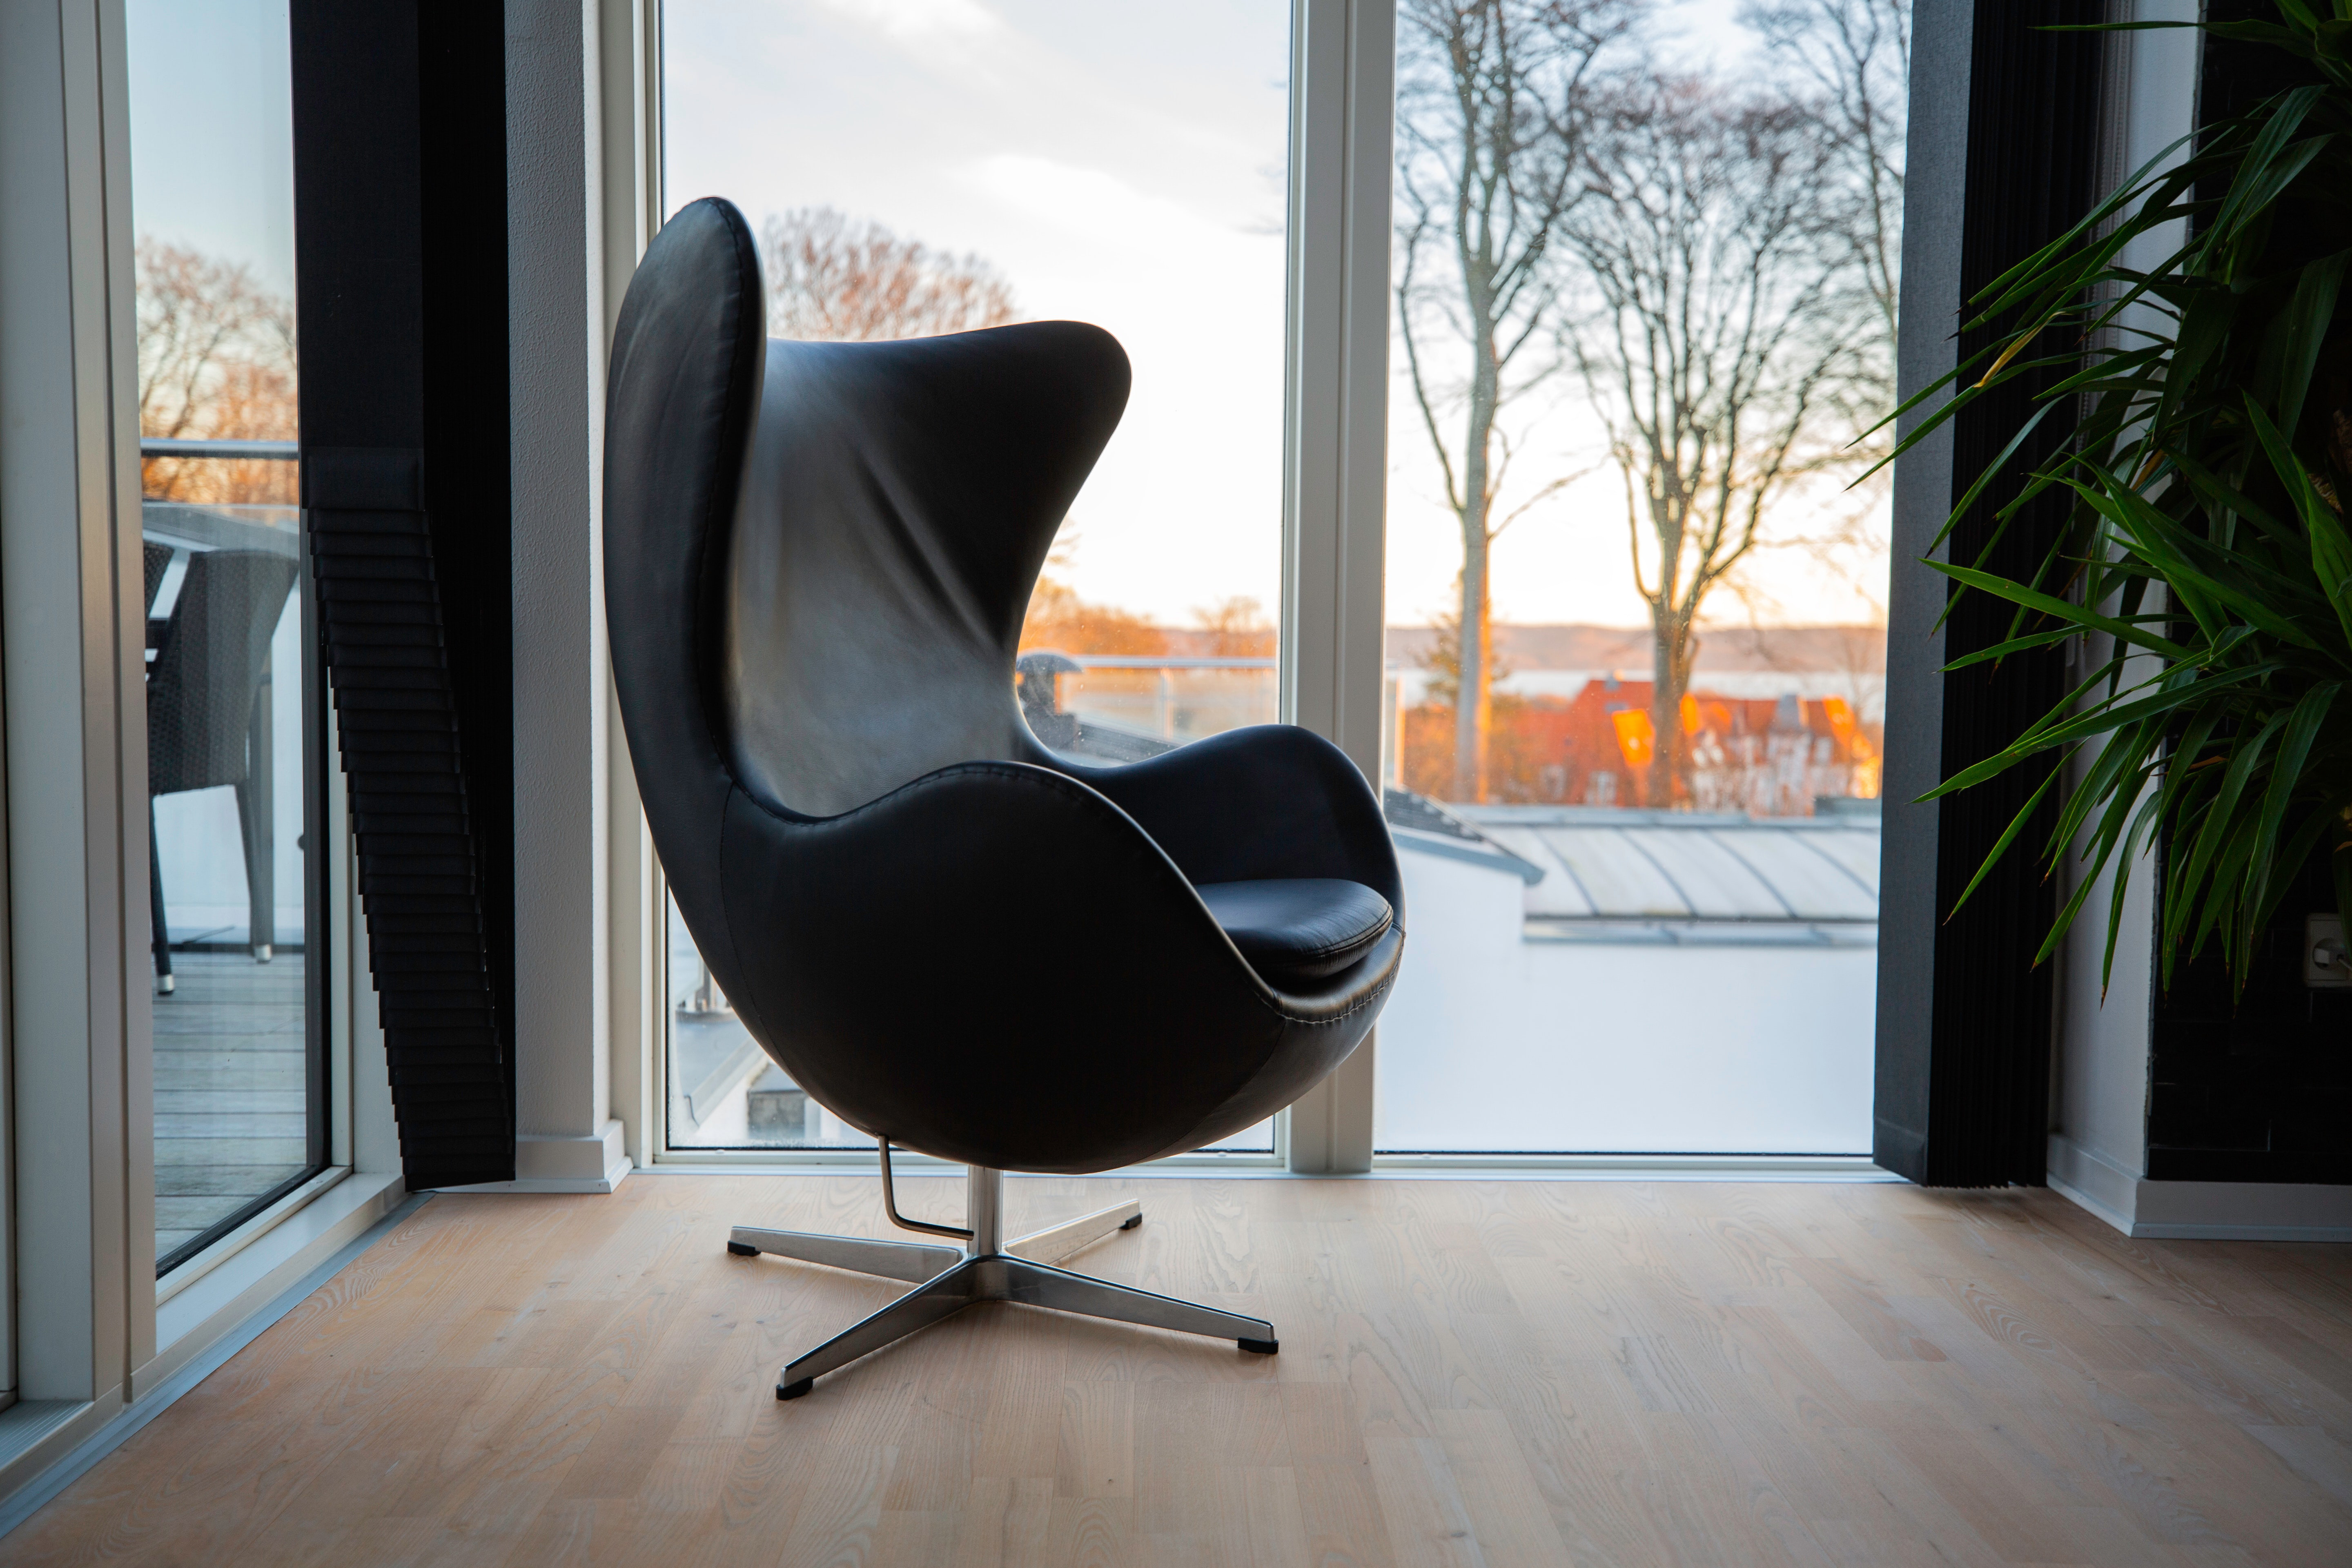 Leather egg chair near the window